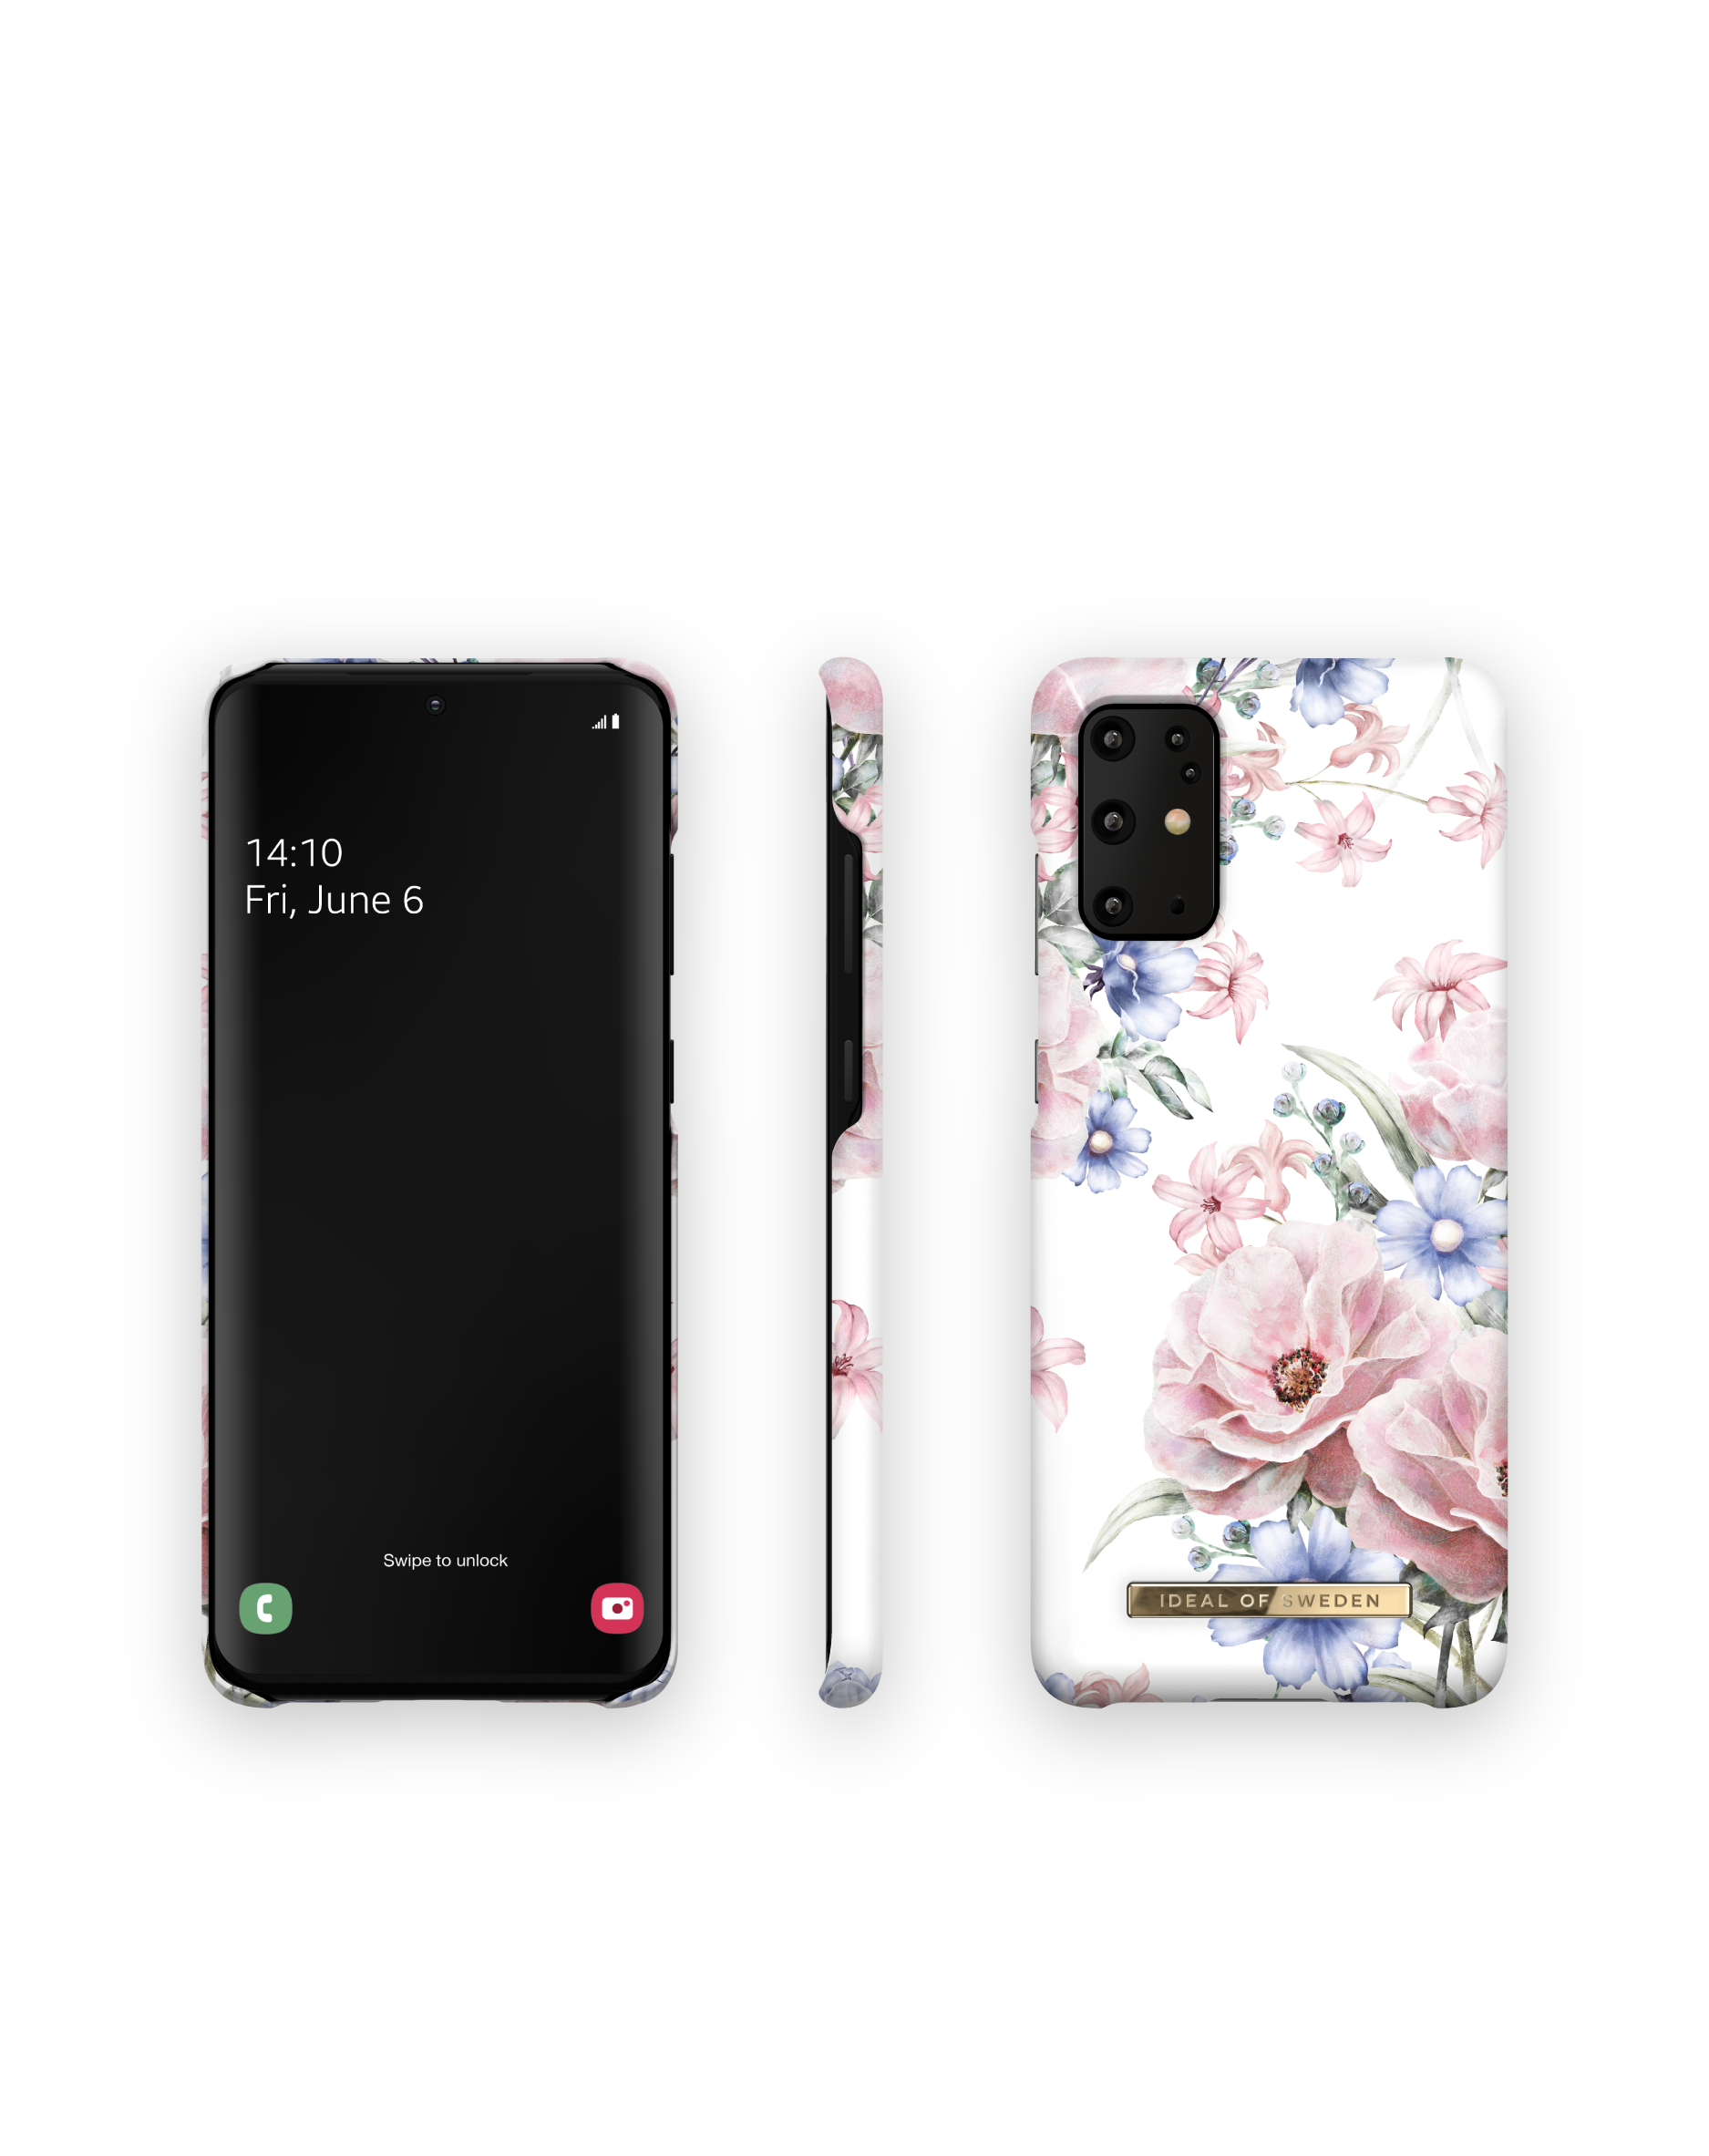 IDFCS17-S11-58, S20+, Samsung, Galaxy Romance OF SWEDEN Backcover, IDEAL Floral